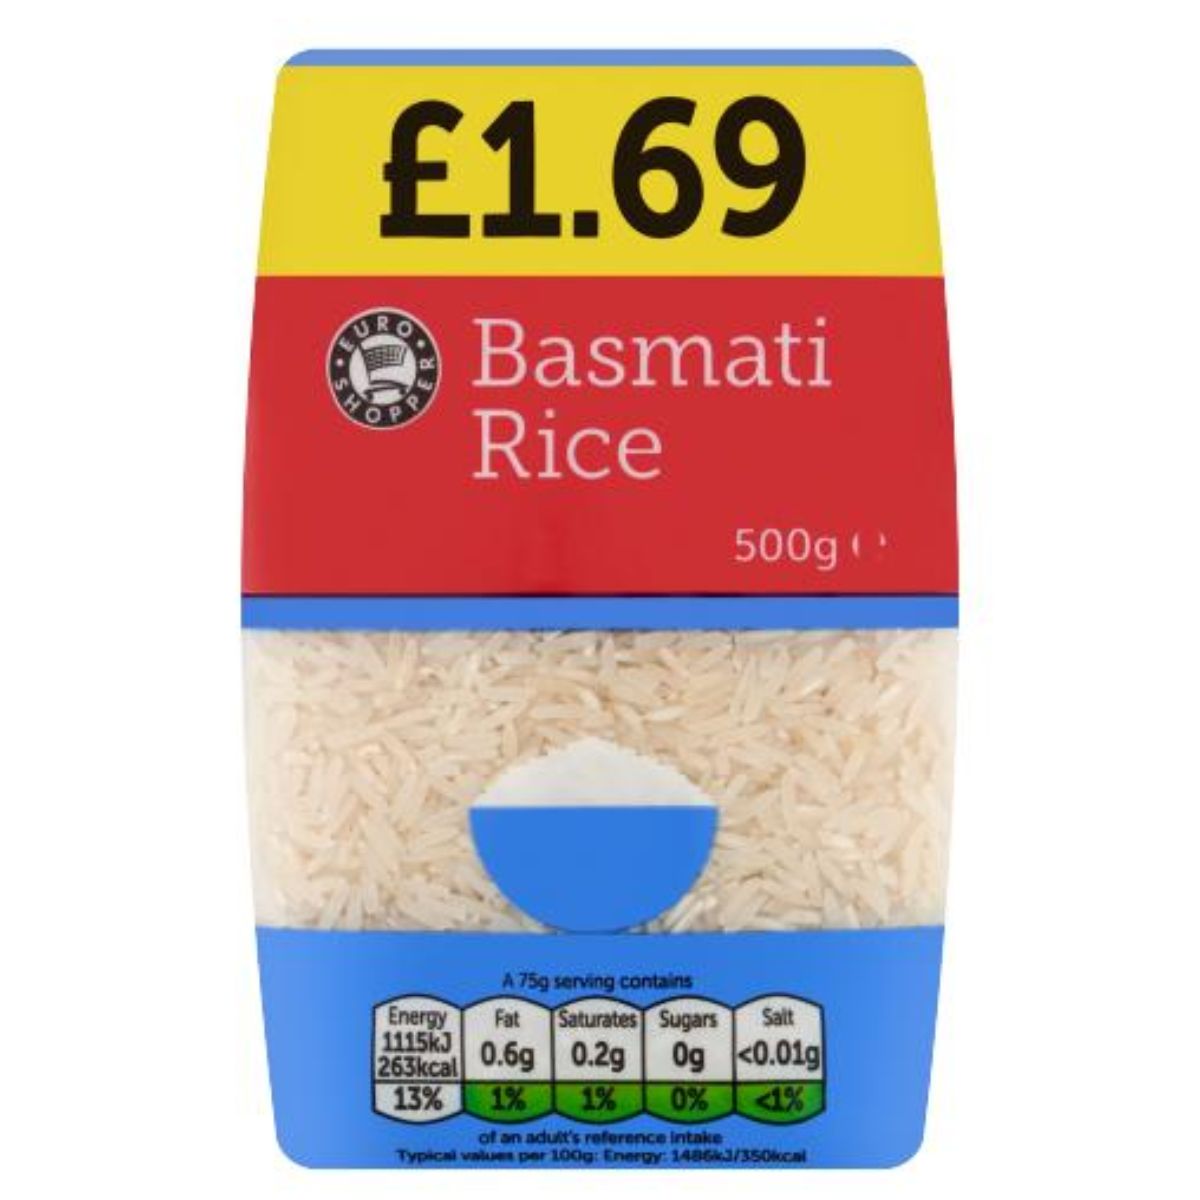 A package of Euro Shopper - Basmati Rice - 500g on a white background.